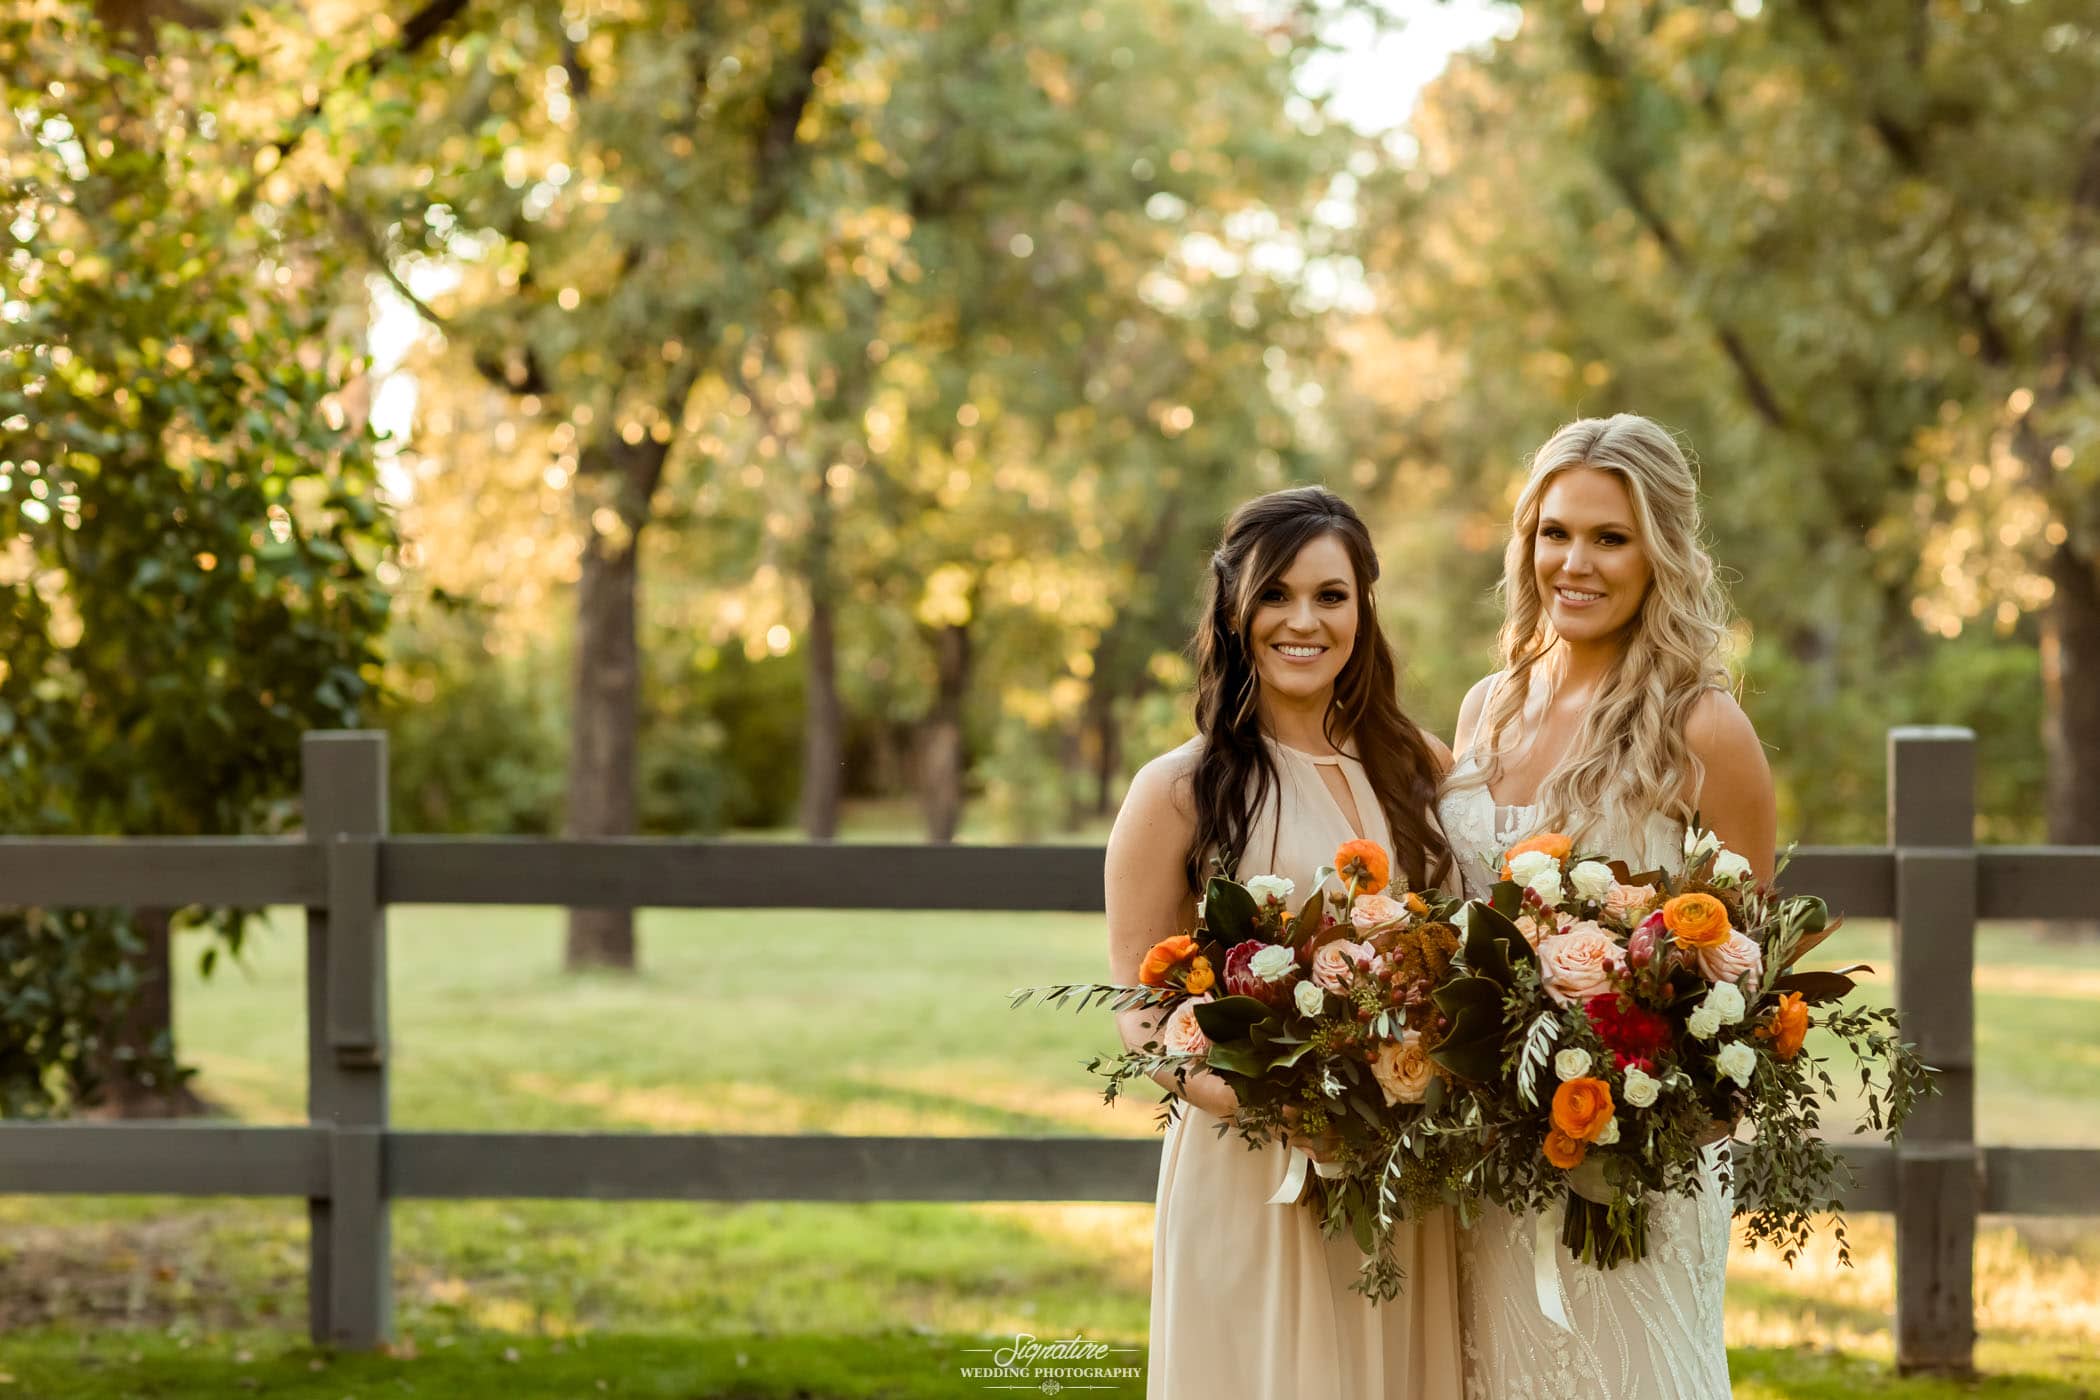 Bride and maid of honor smiling at camera outside